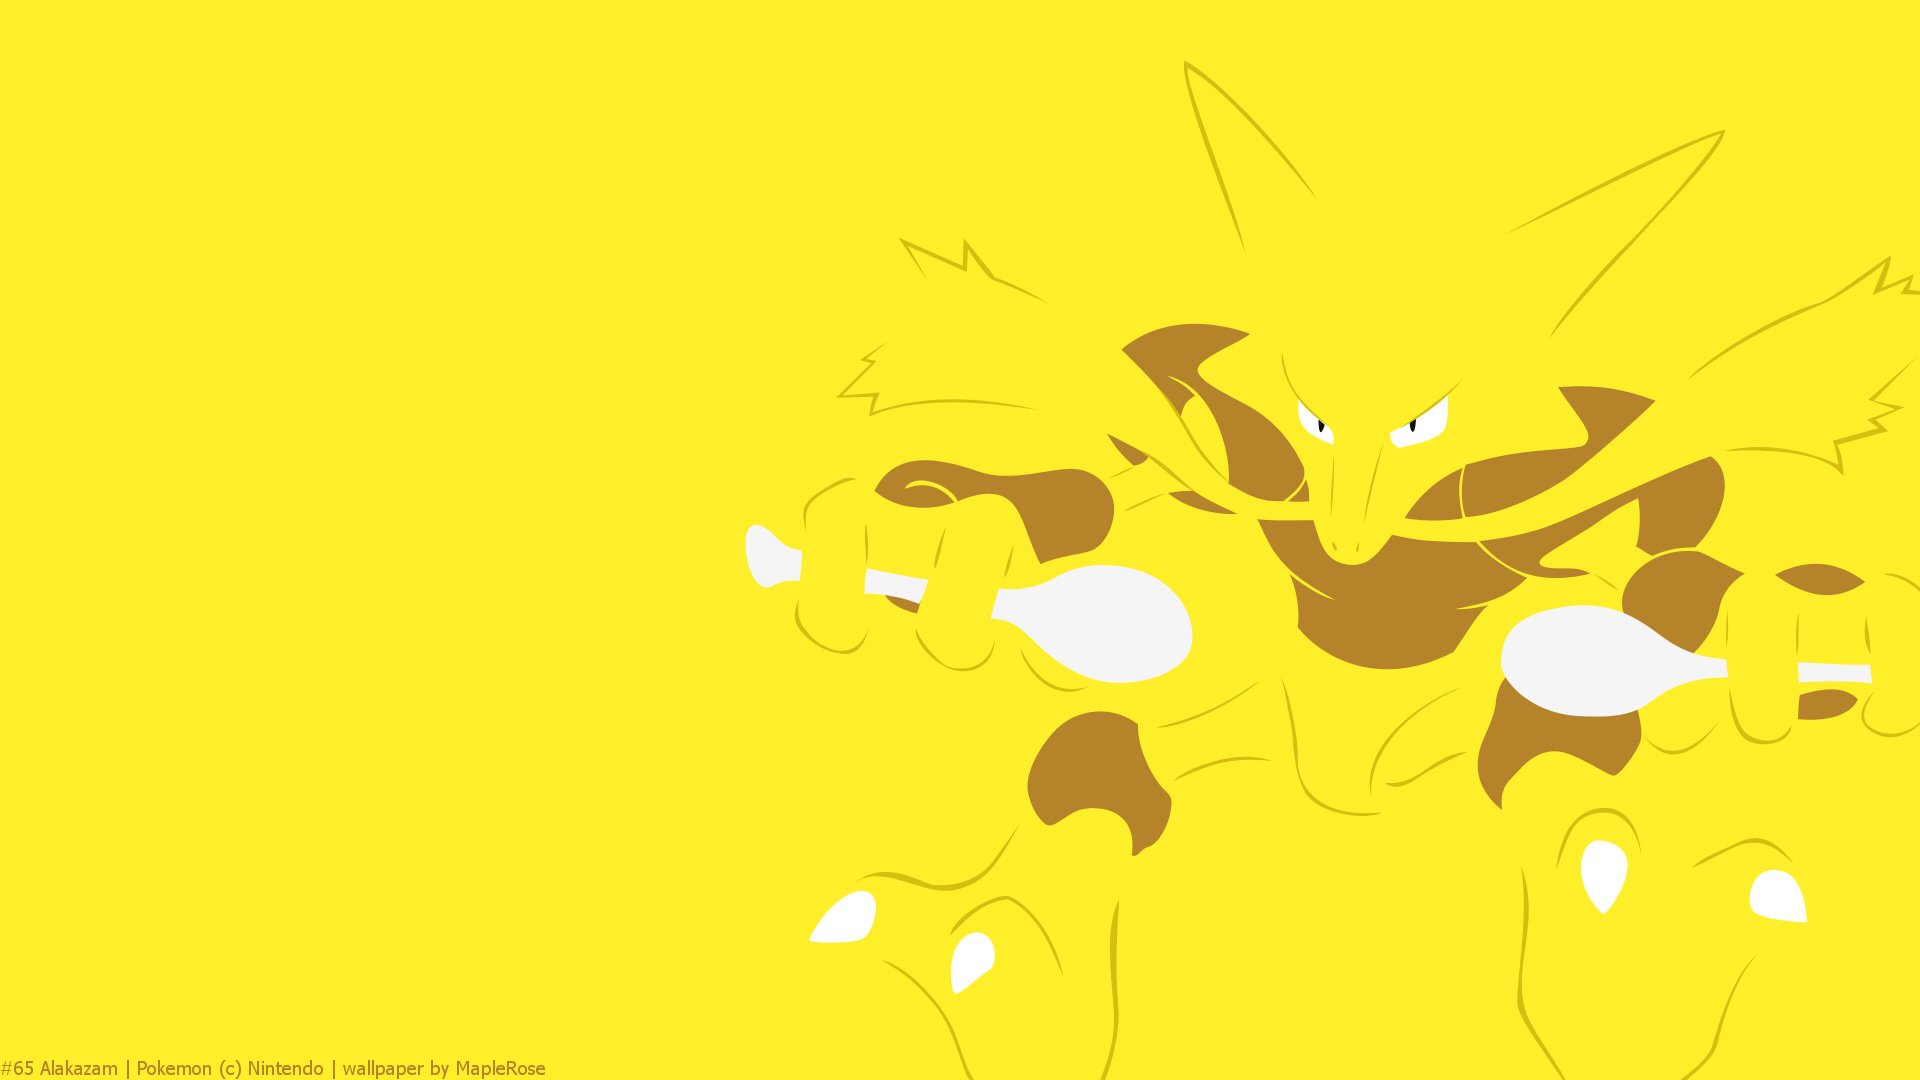 Pokemon - Alakazam(with cuts and a as whole)